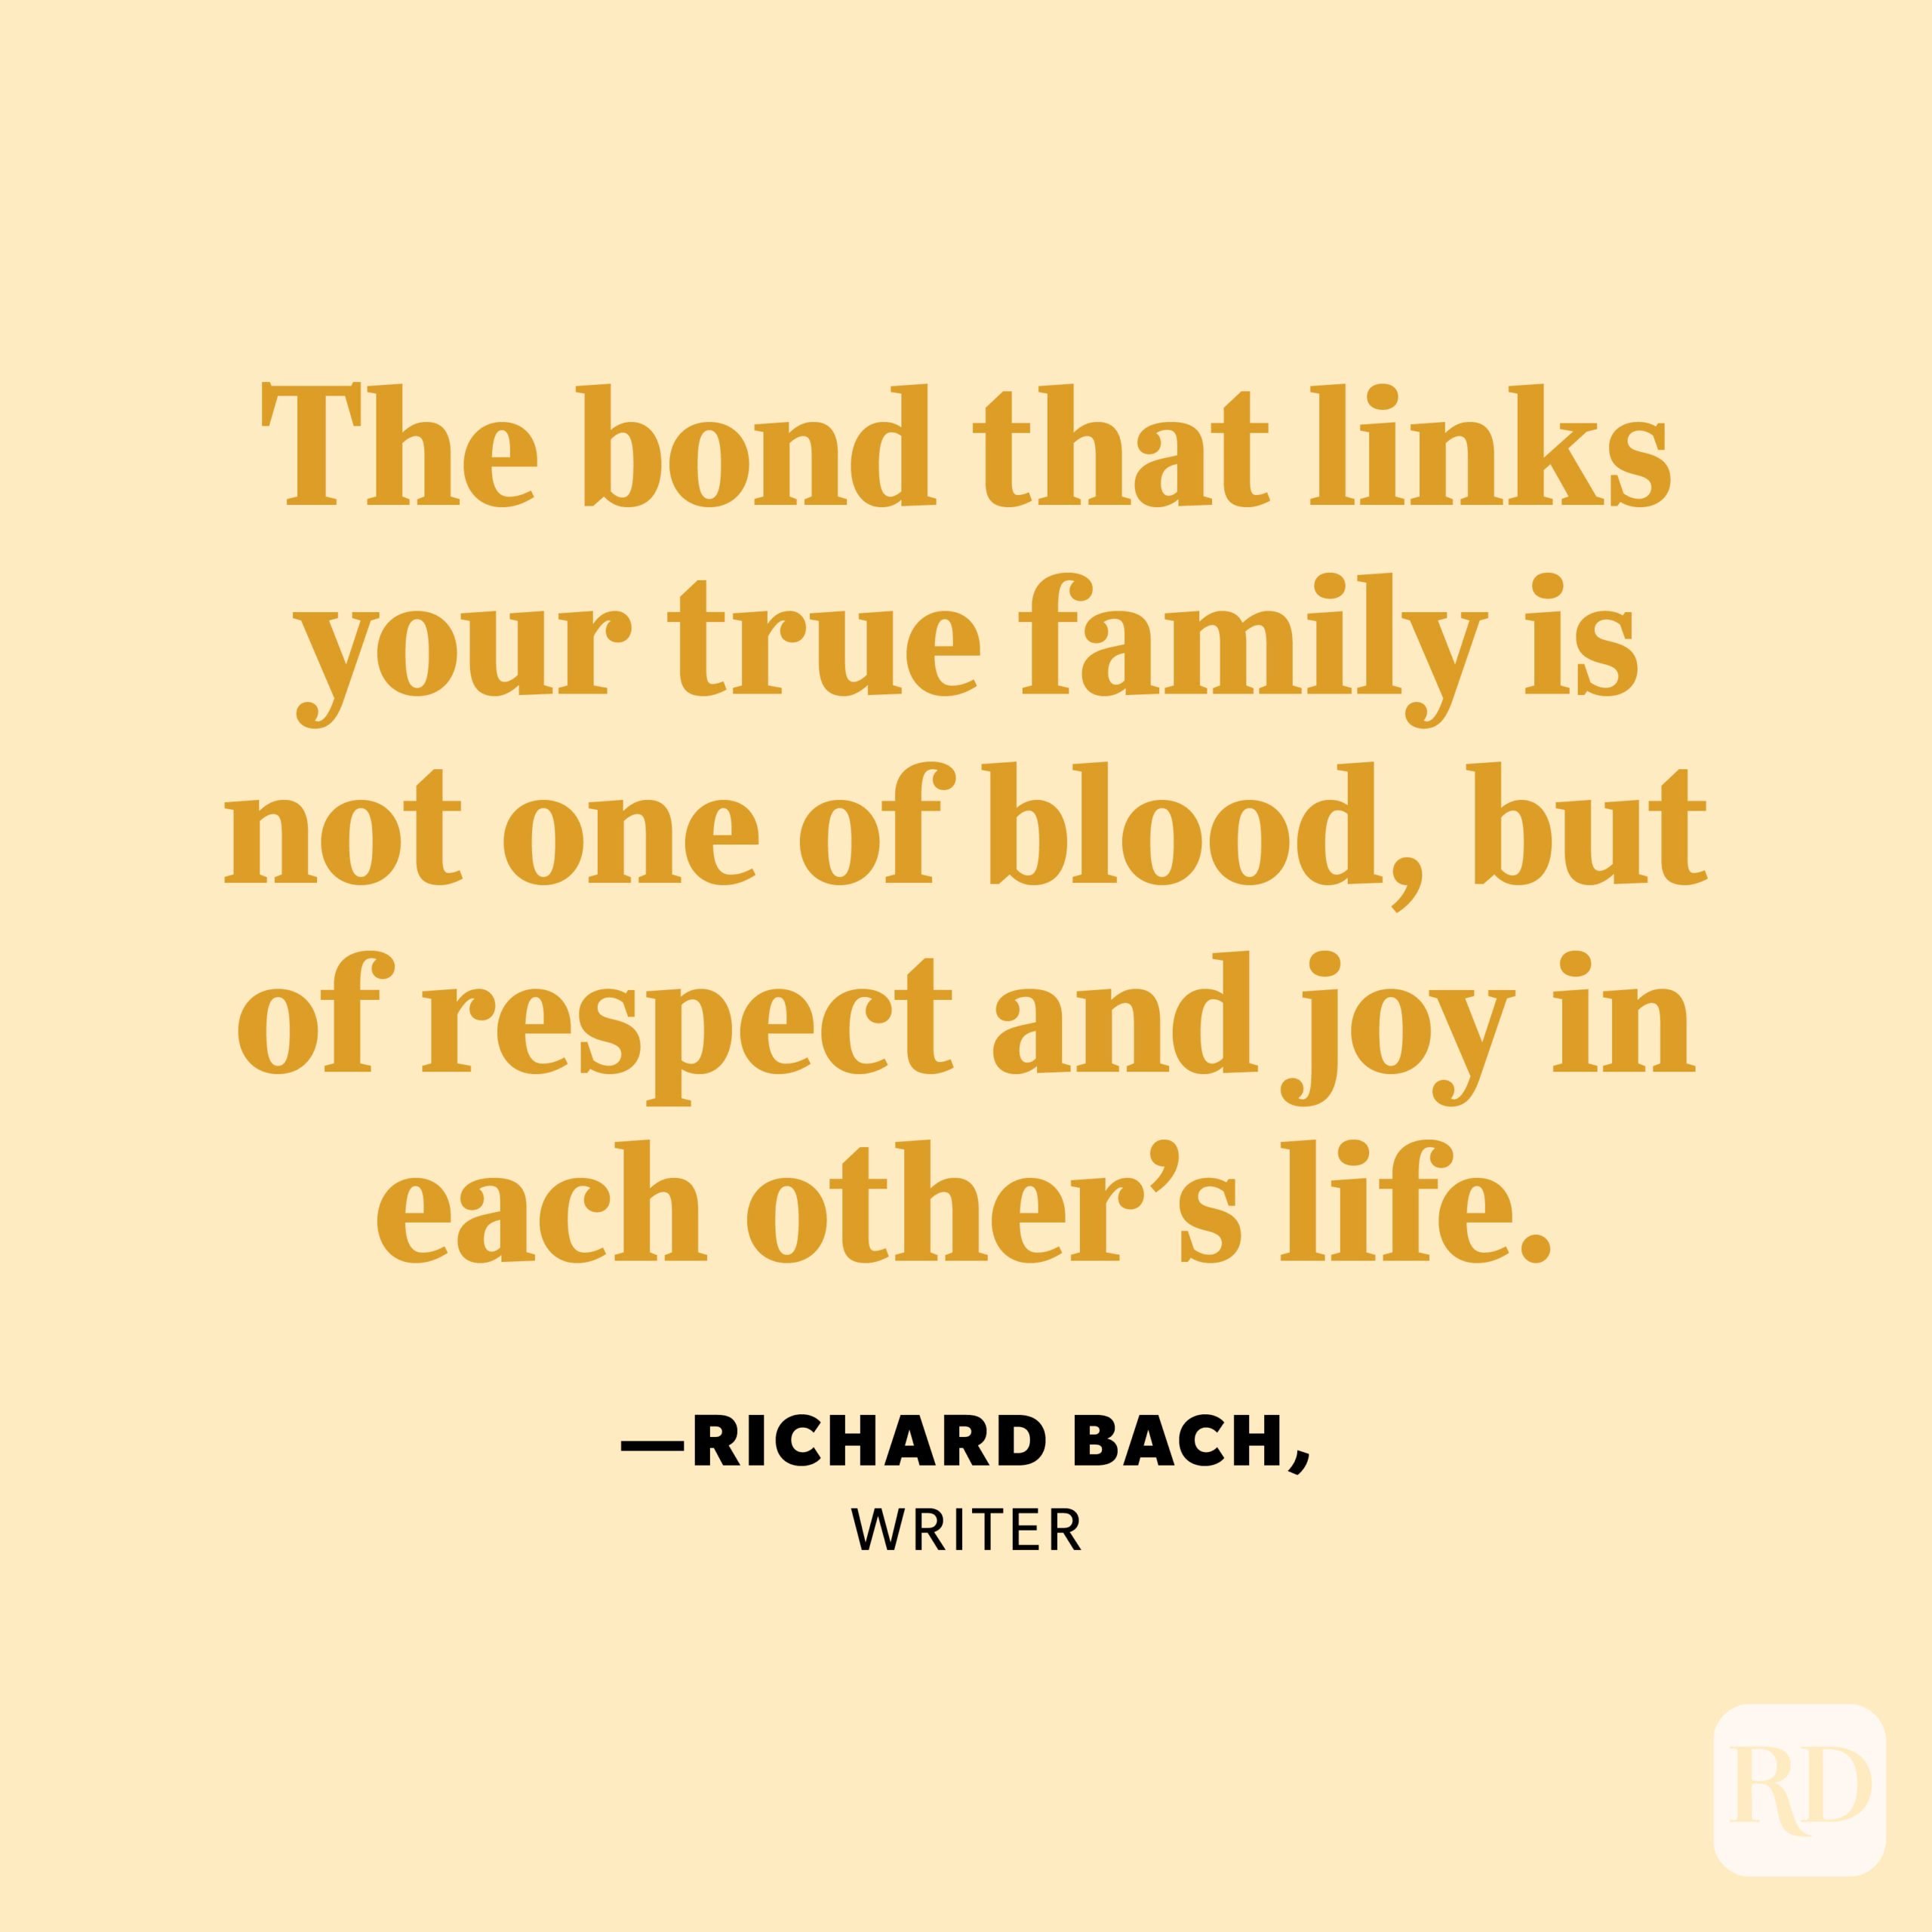 “The bond that links your true family is not one of blood, but of respect and joy in each other’s life.” —Richard Bach, writer. 